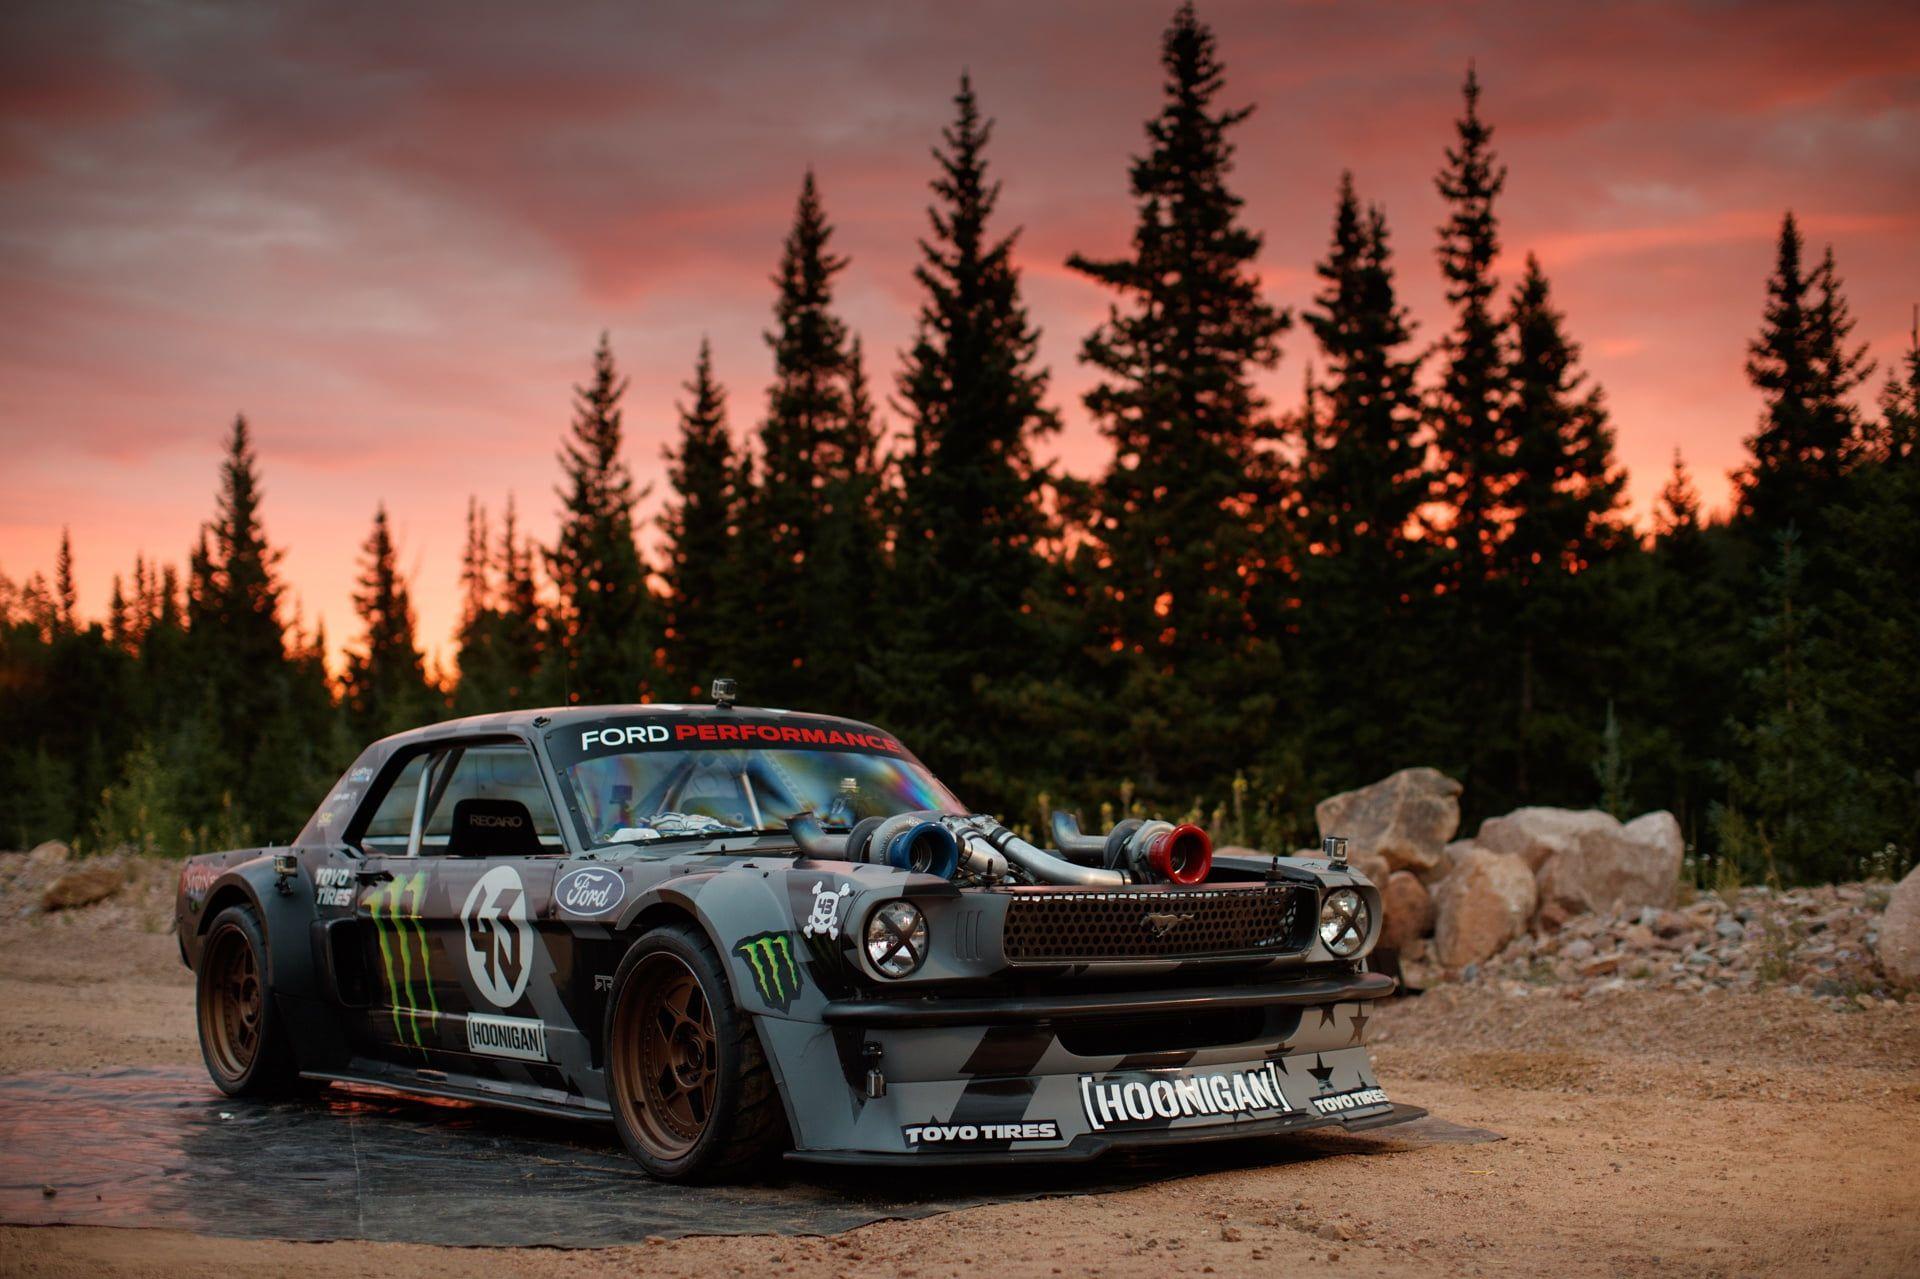 Gray Coupe Mustang Ford Ken Block Hoonicorn 1400hp Larry